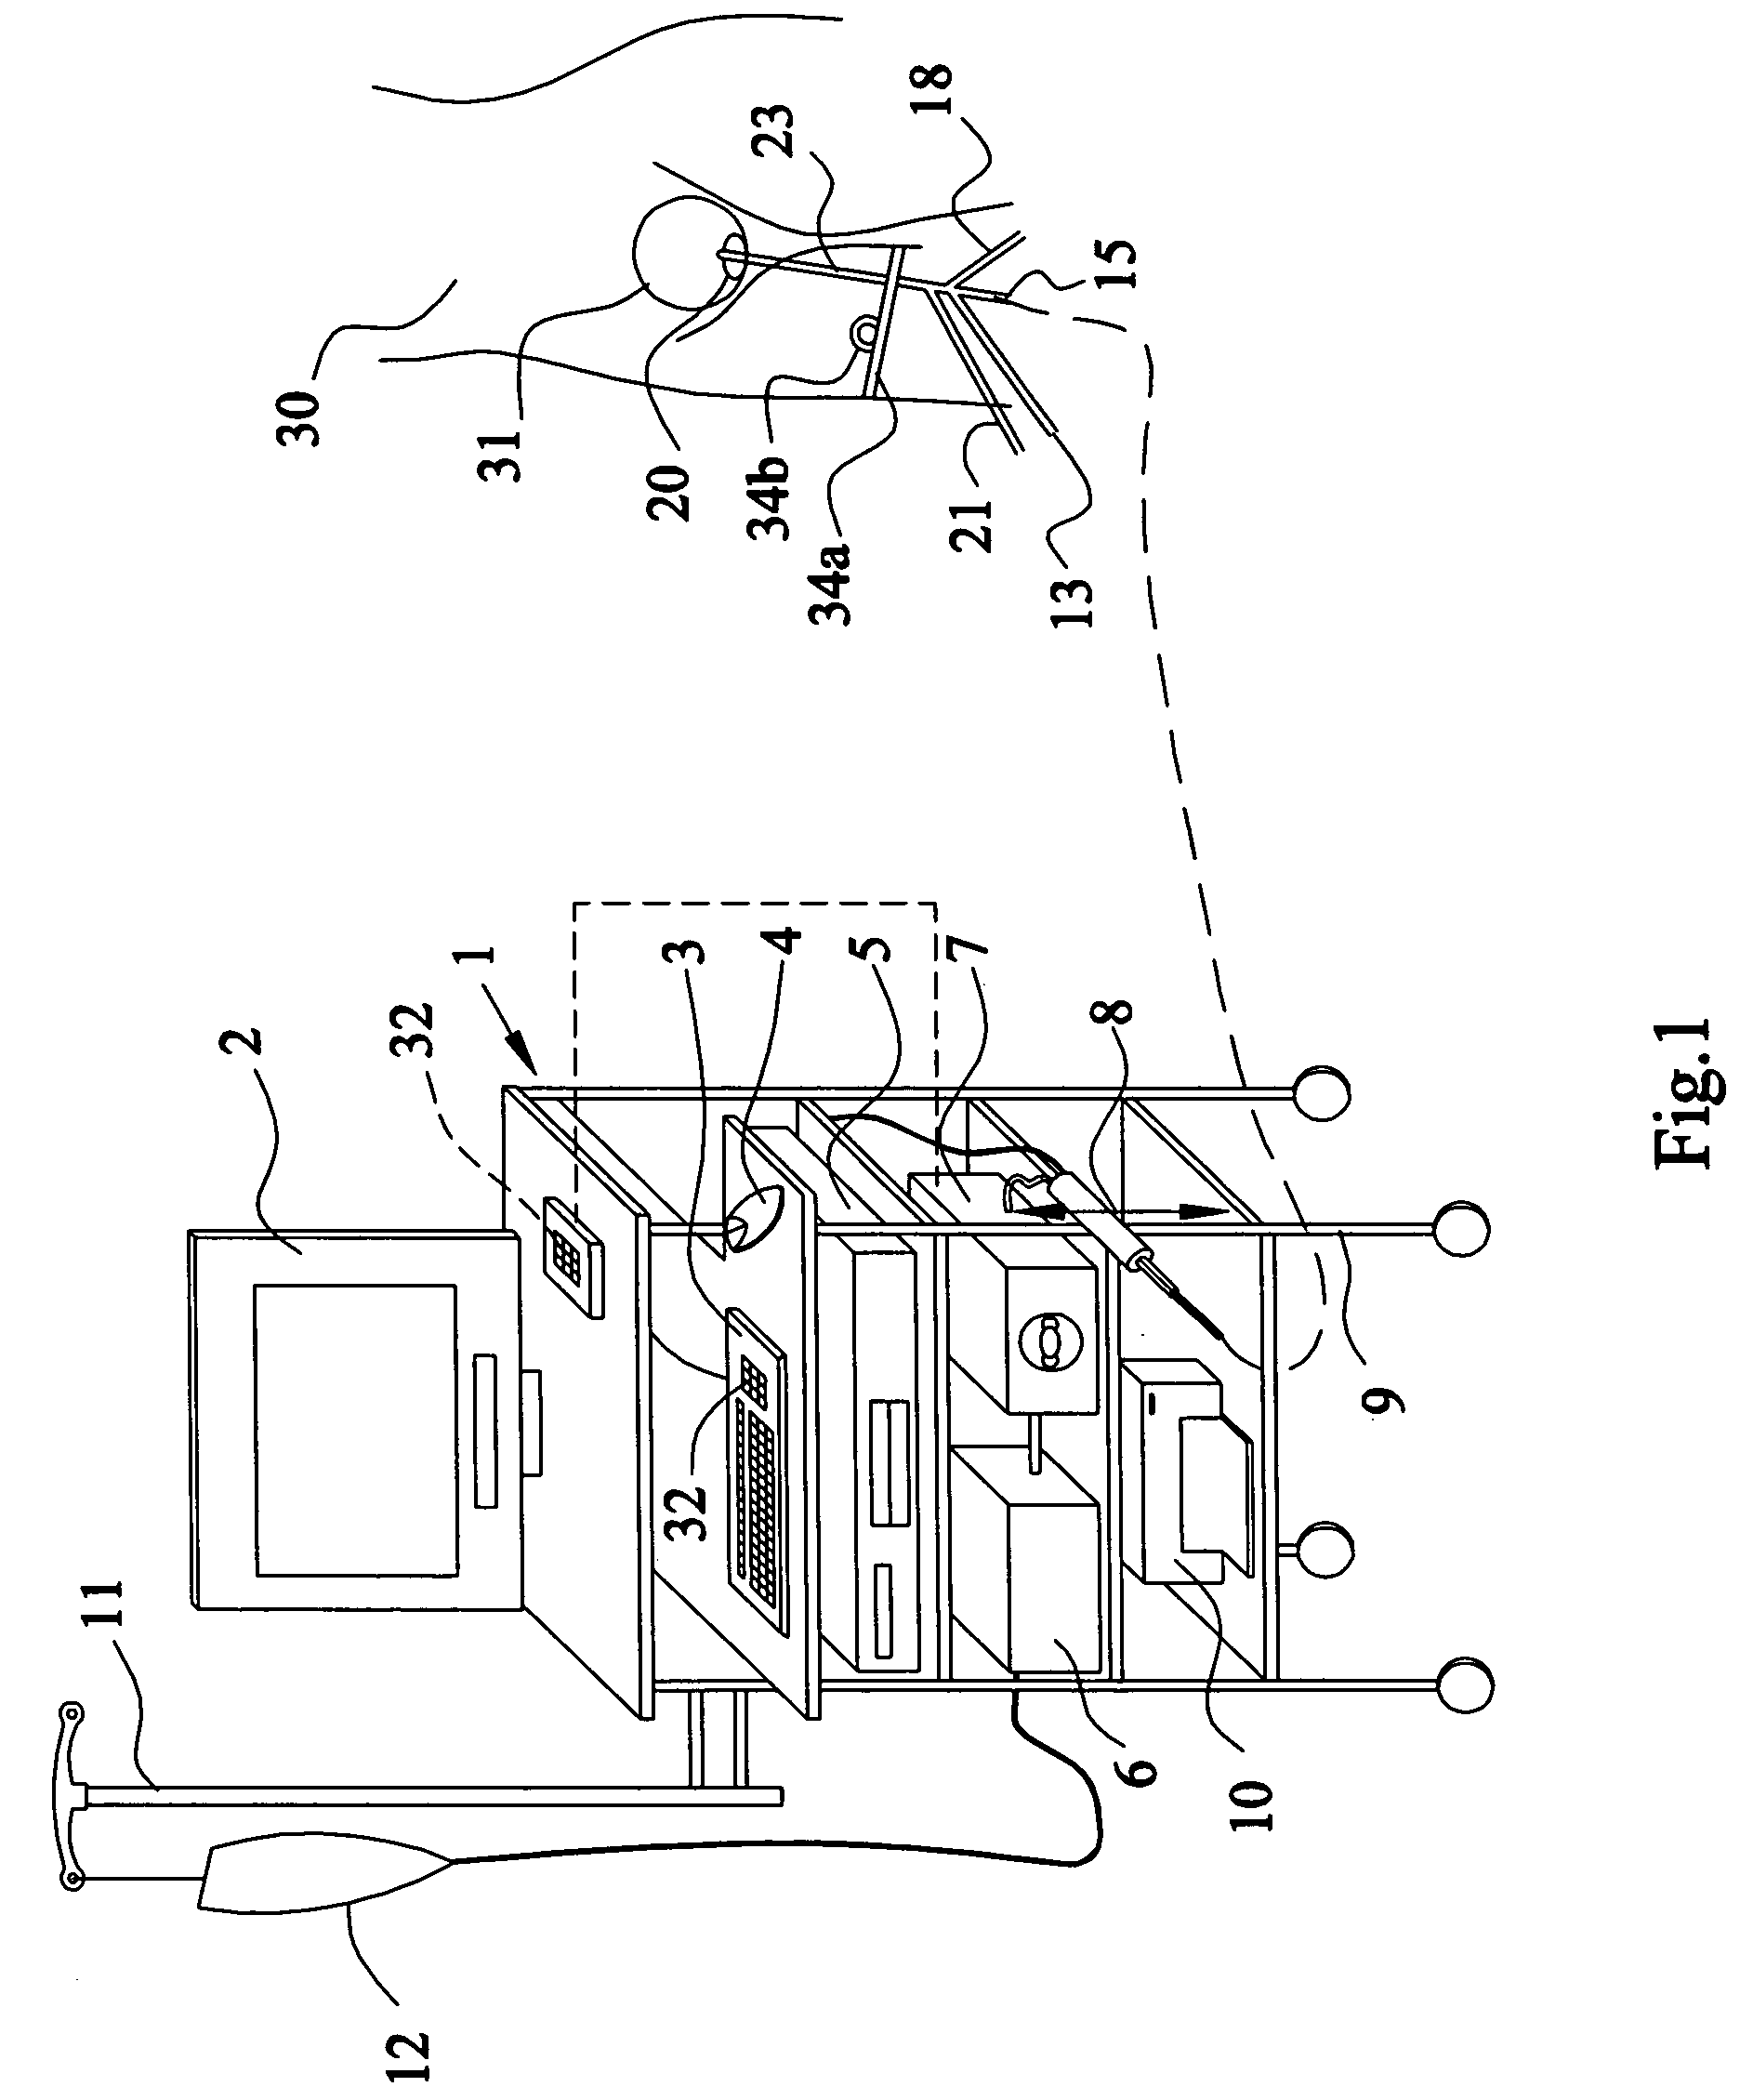 Apparatus and method for the controlled hydrodistention of the urinary bladder